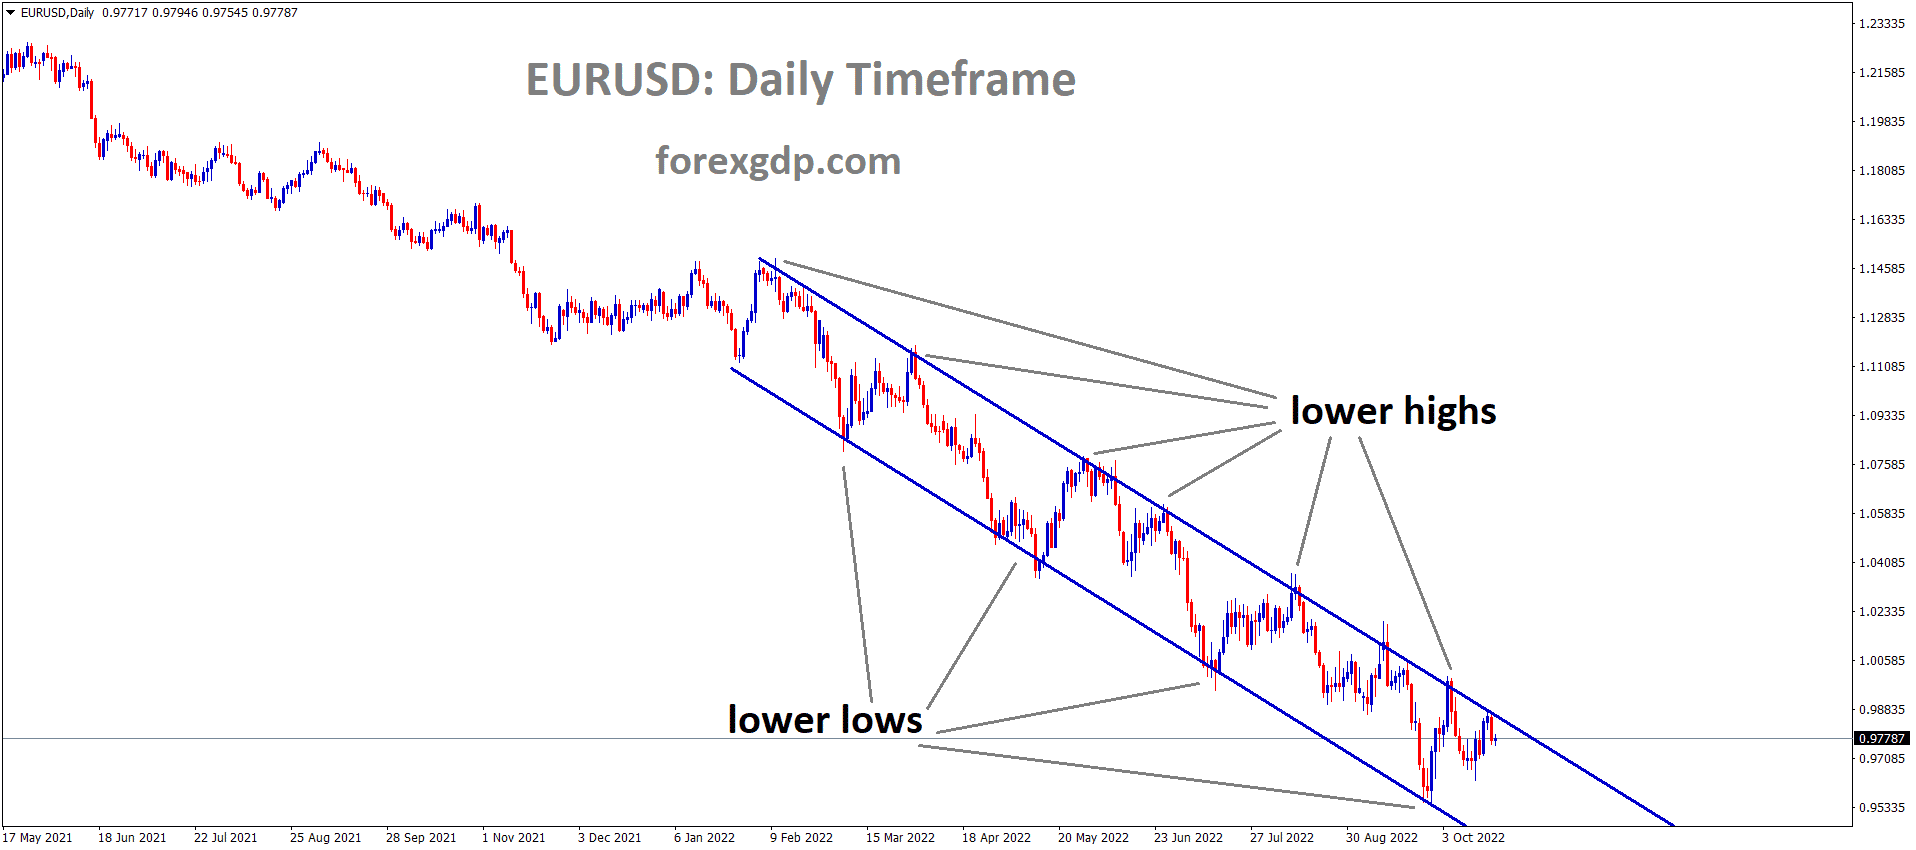 EURUSD is moving in the Descending channel and the market has fallen from the lower high area of the channel 2